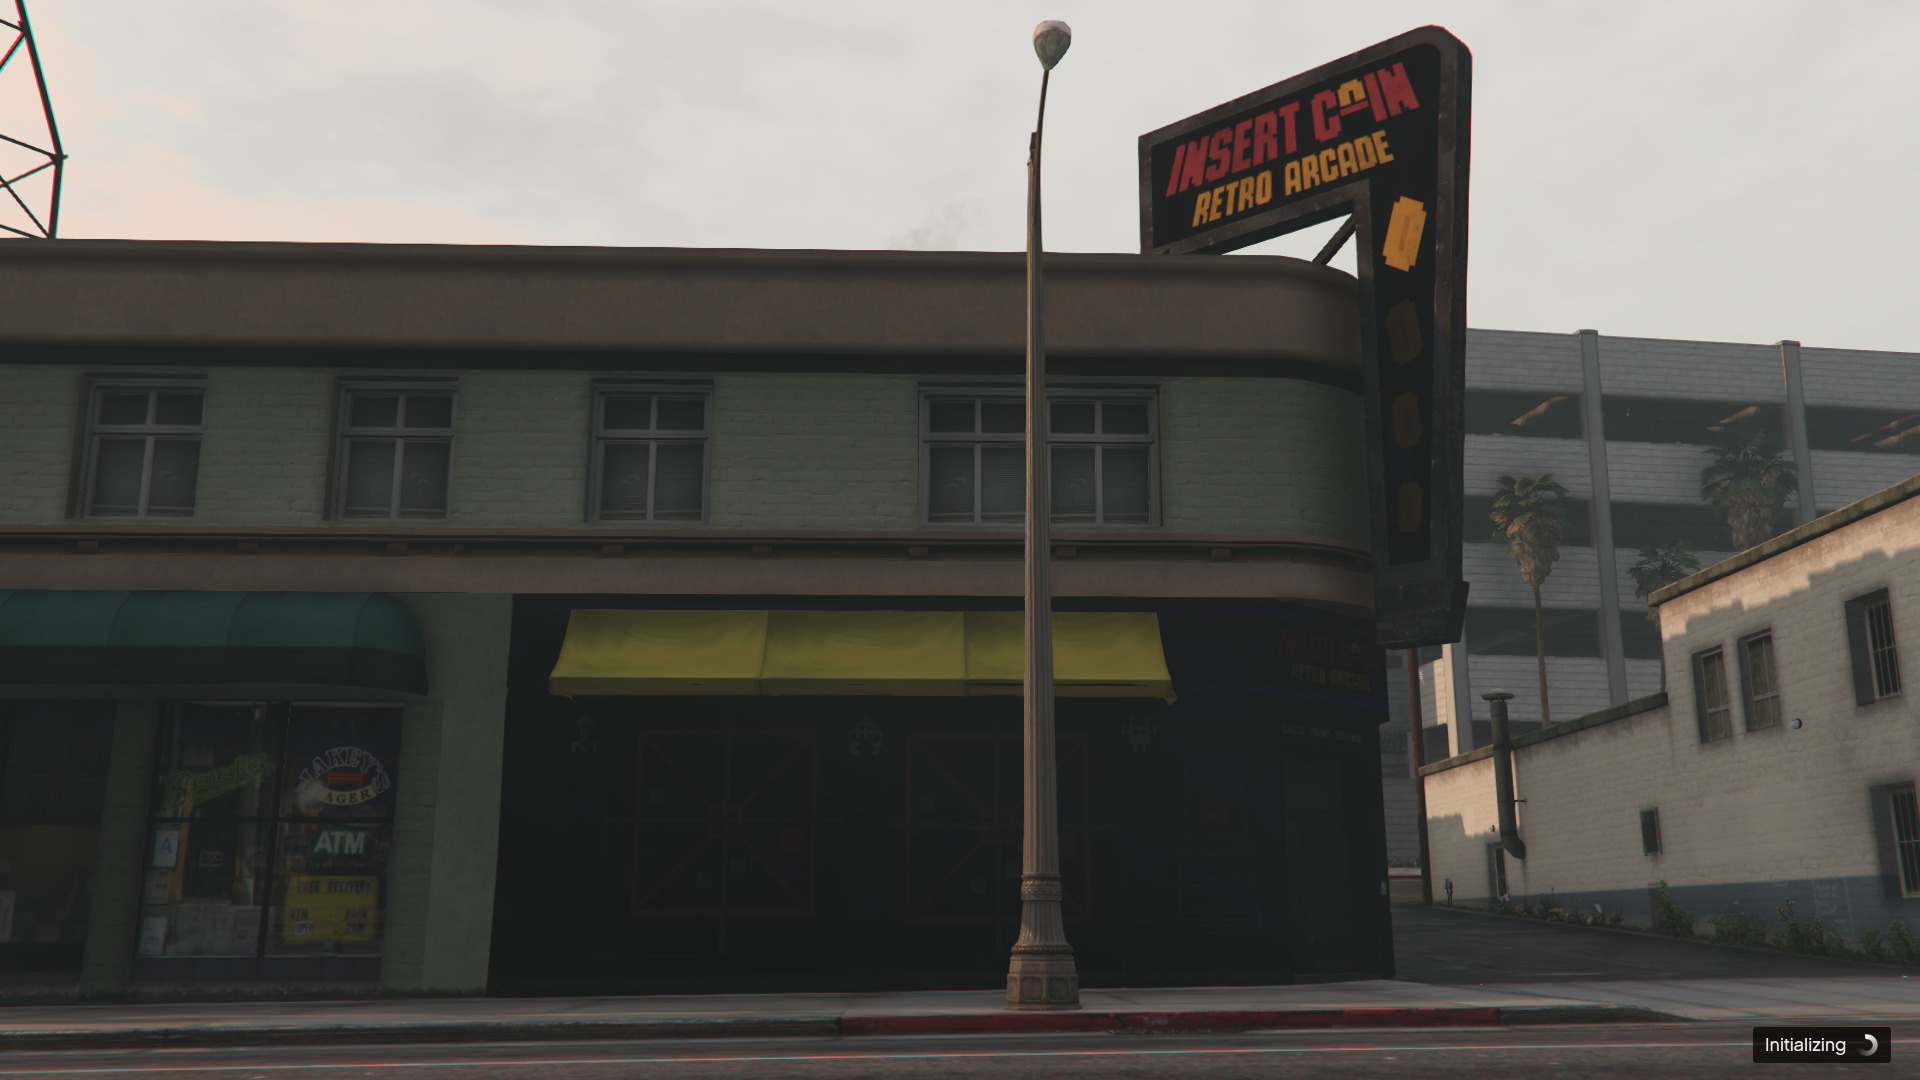 You can buy the Insert Coin Arcade in GTA 5